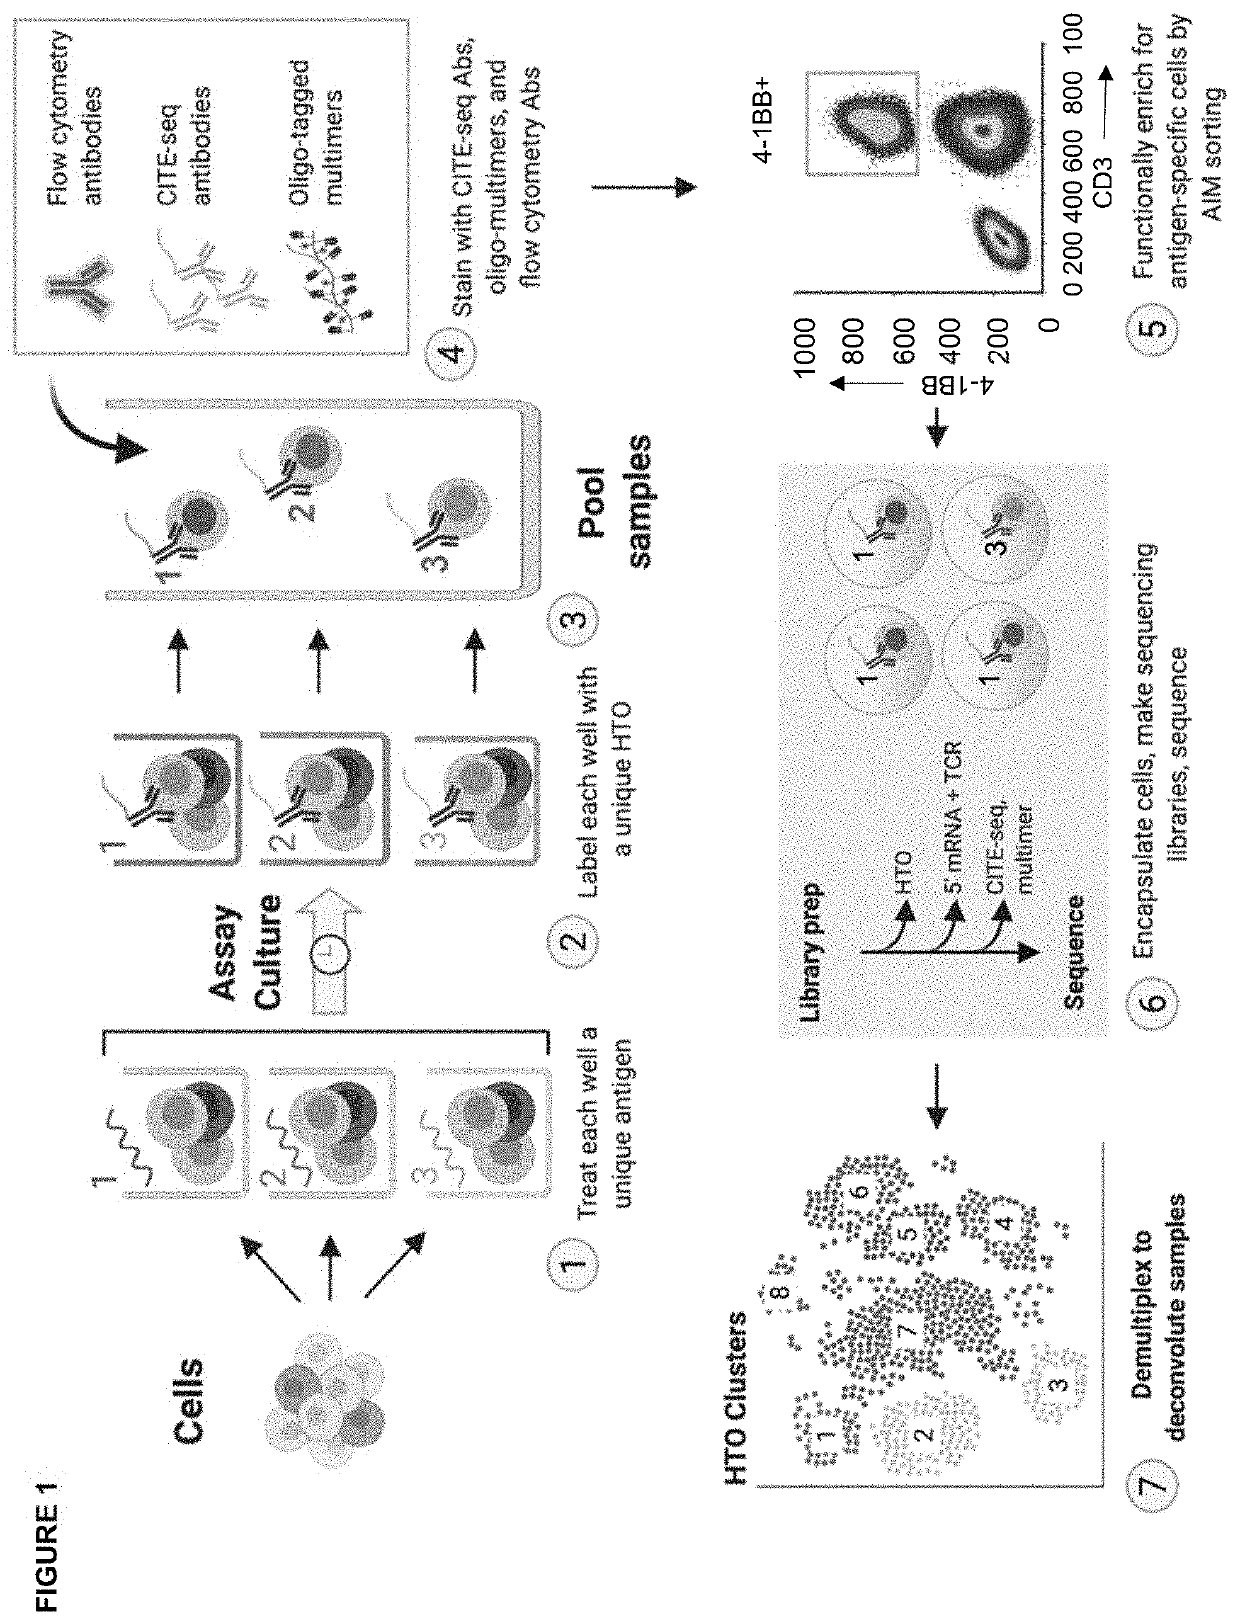 High-throughput method to screen cognate T cell and epitope reactivities in primary human cells